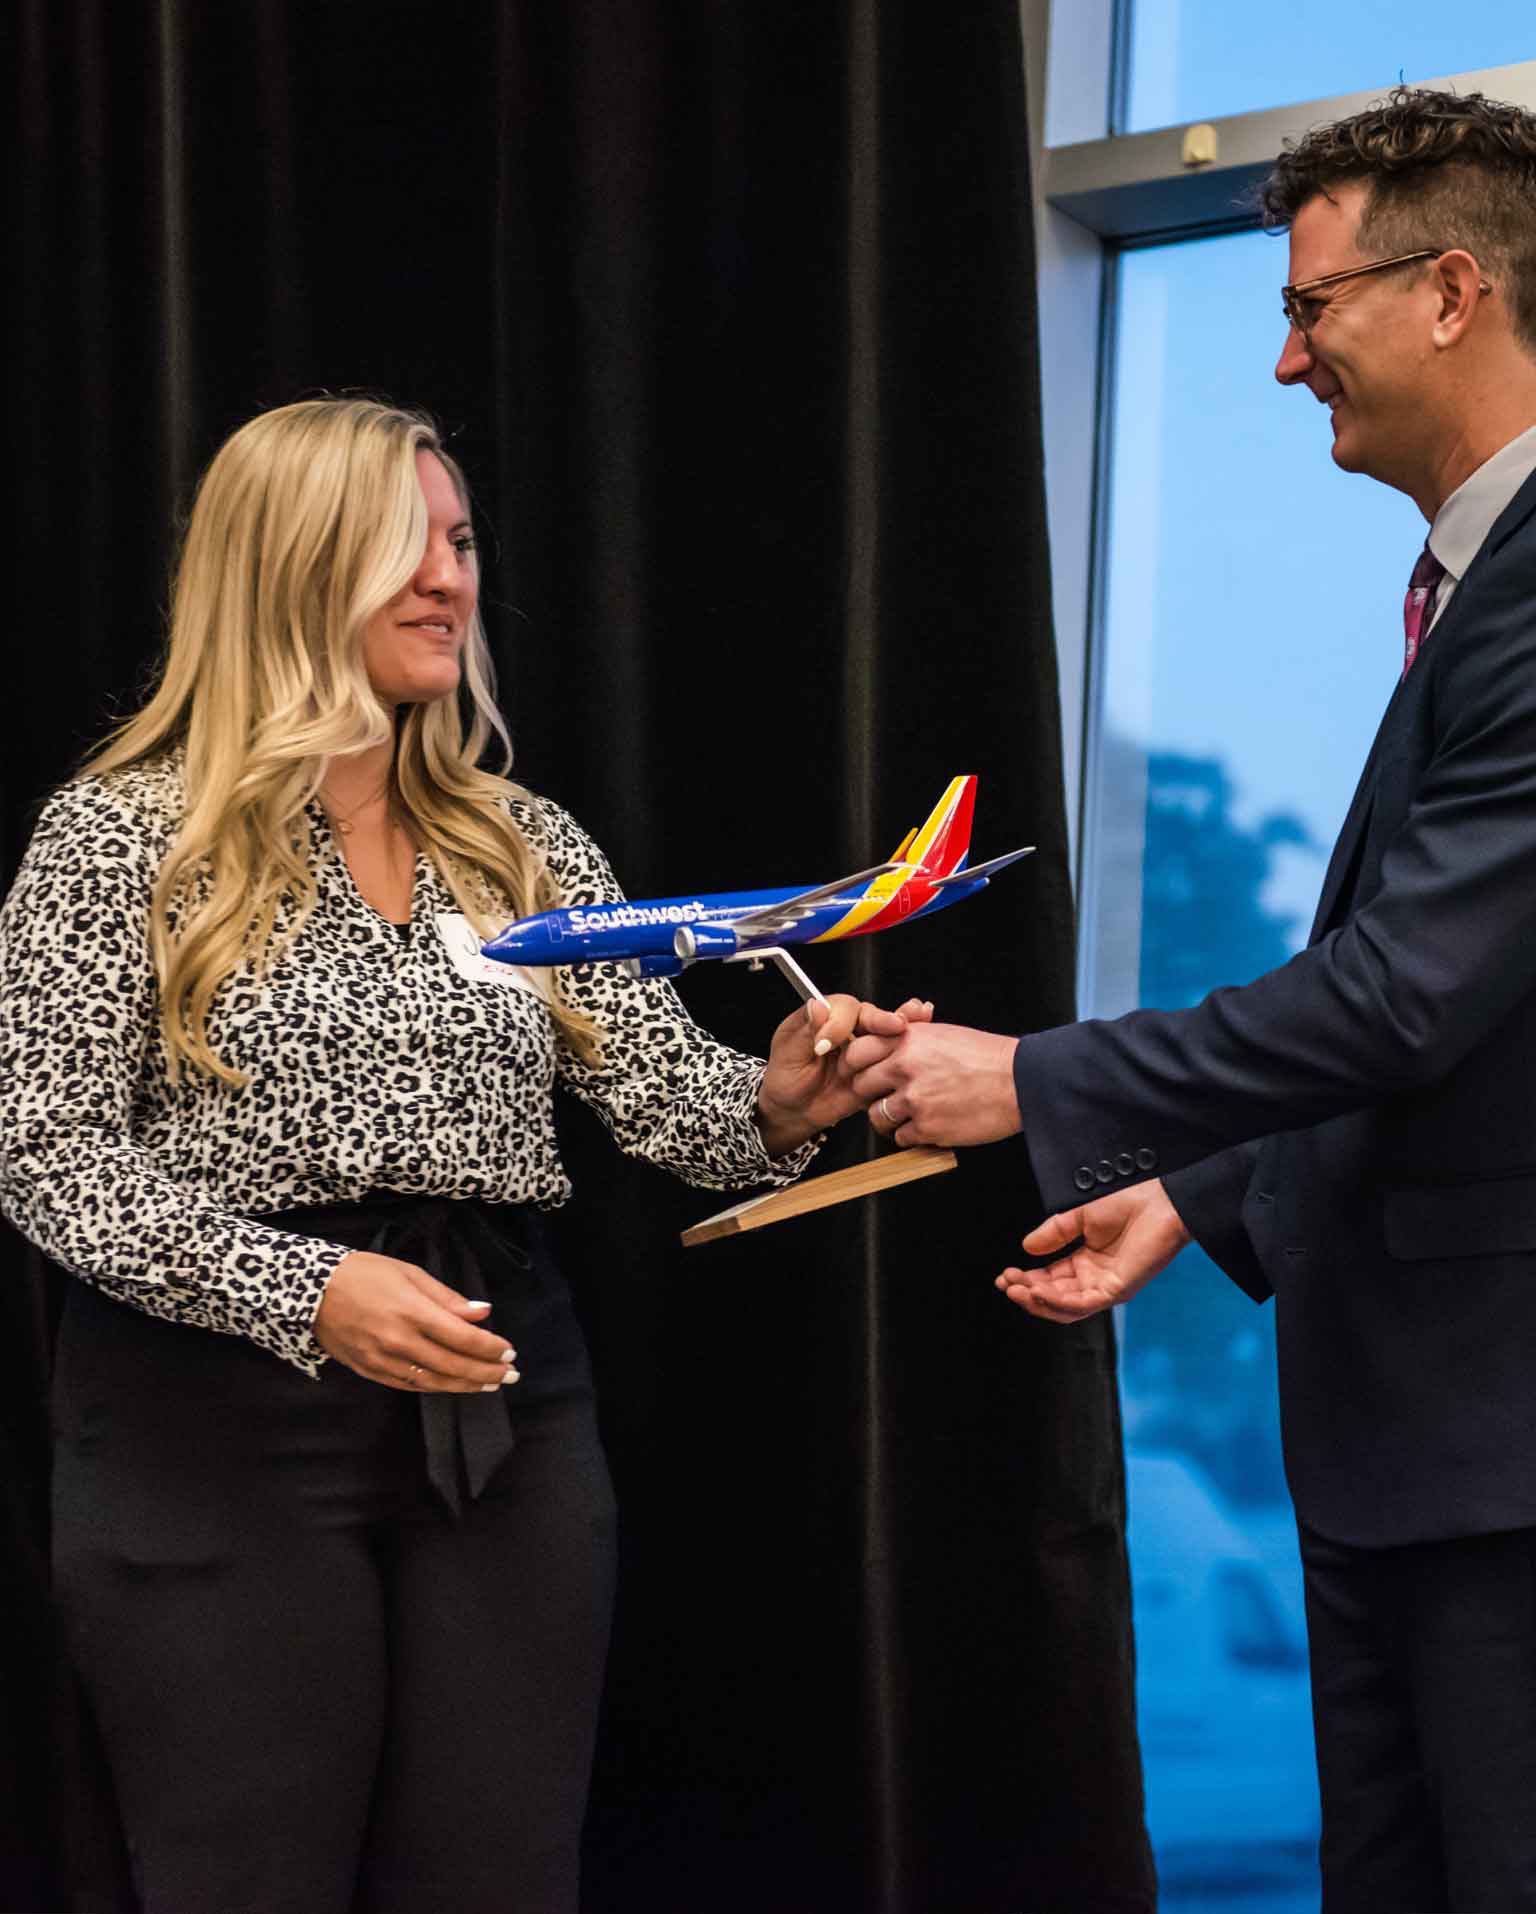 Southwest Airlines First Officer and ATP graduate Jordan Lascomb honored during the alumni reception